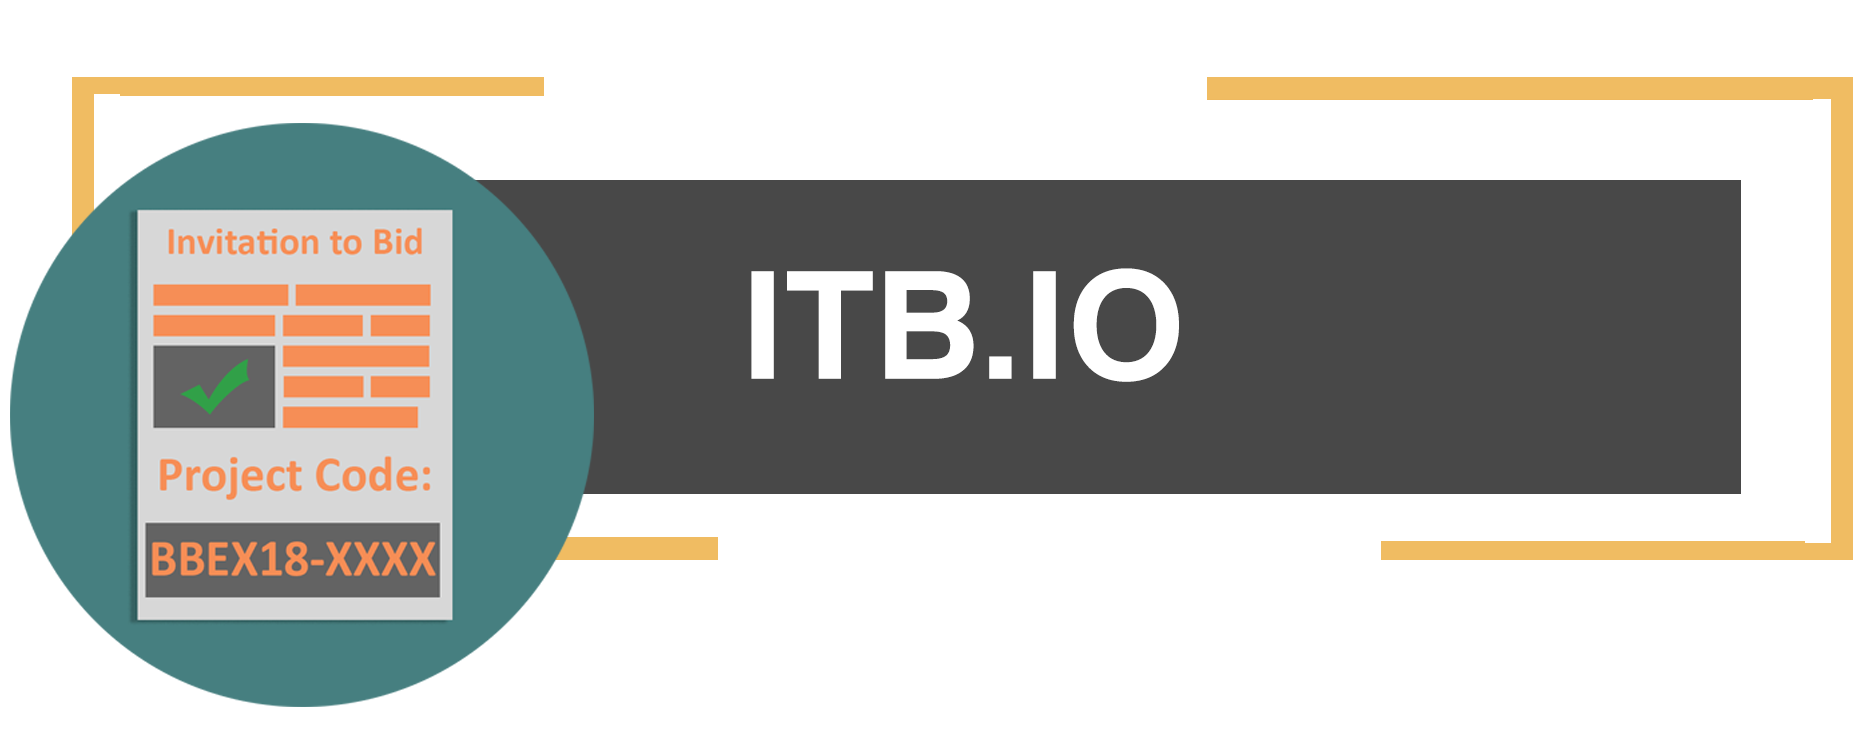 about itb image